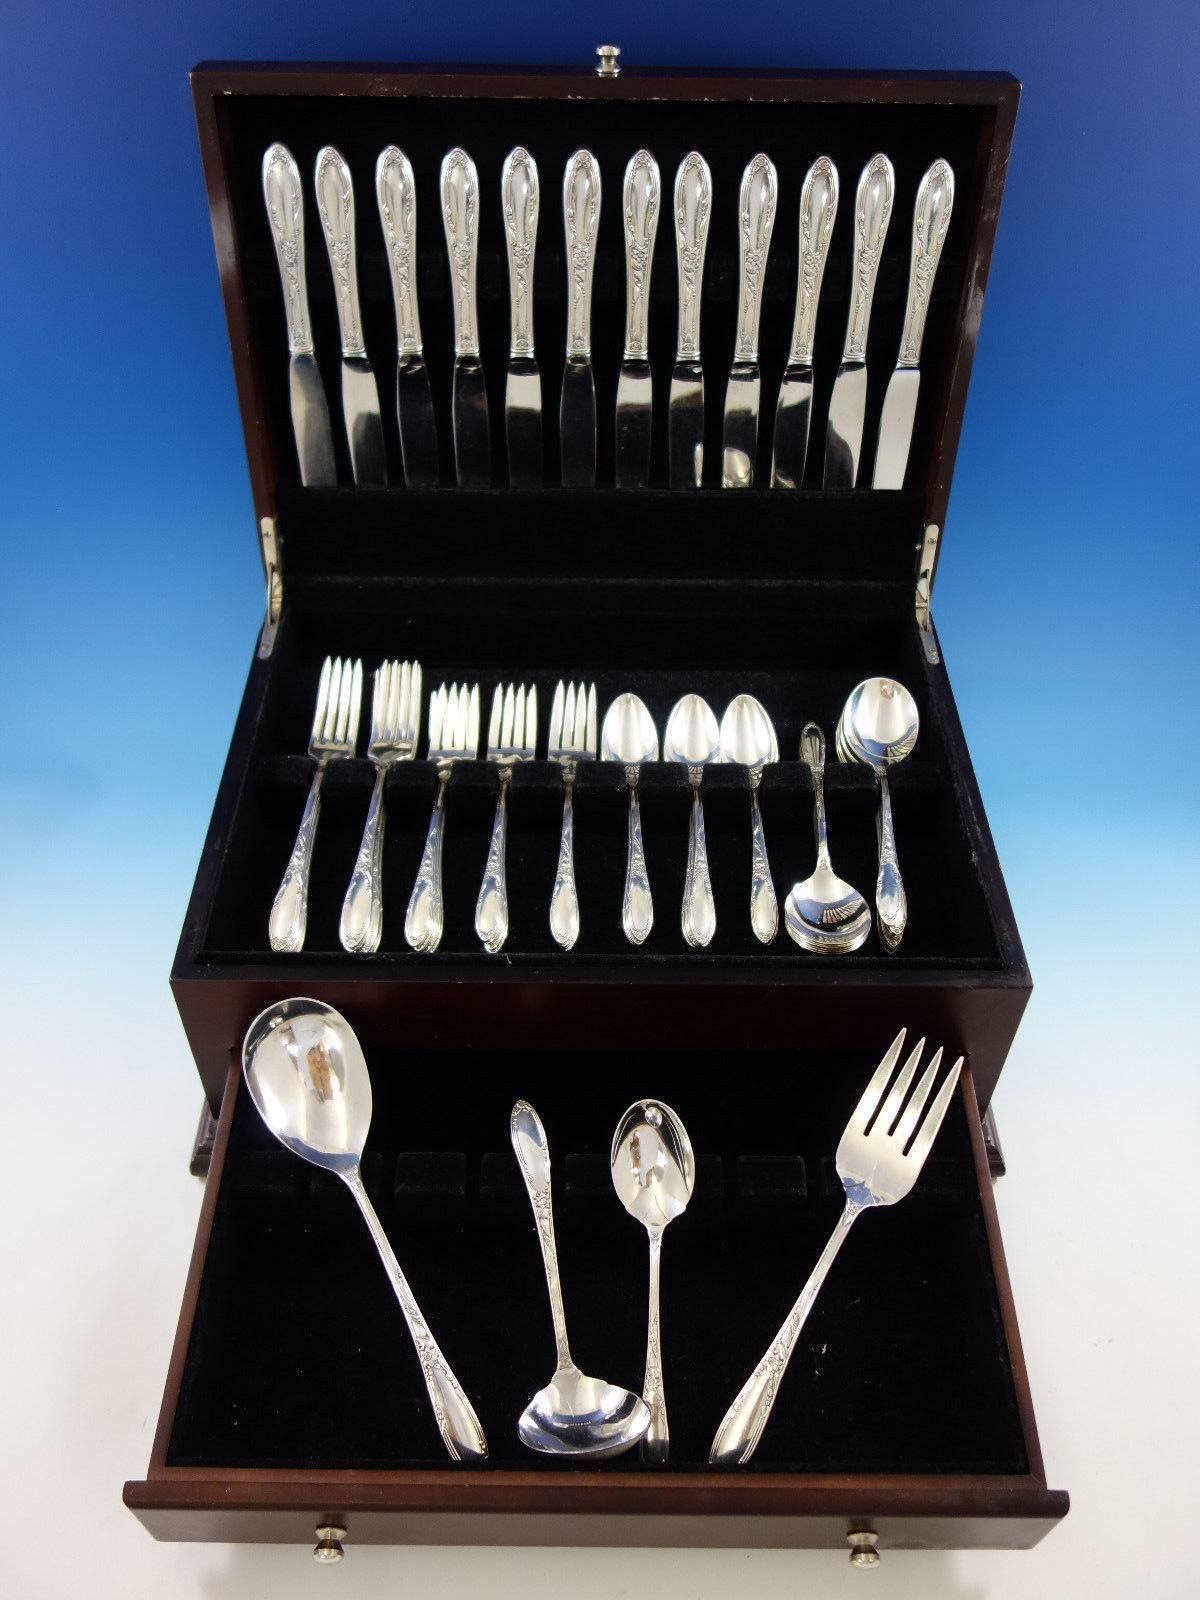 Virginian by Oneida sterling silver flatware set of 64 pieces. This set includes: 

12 knives, 9